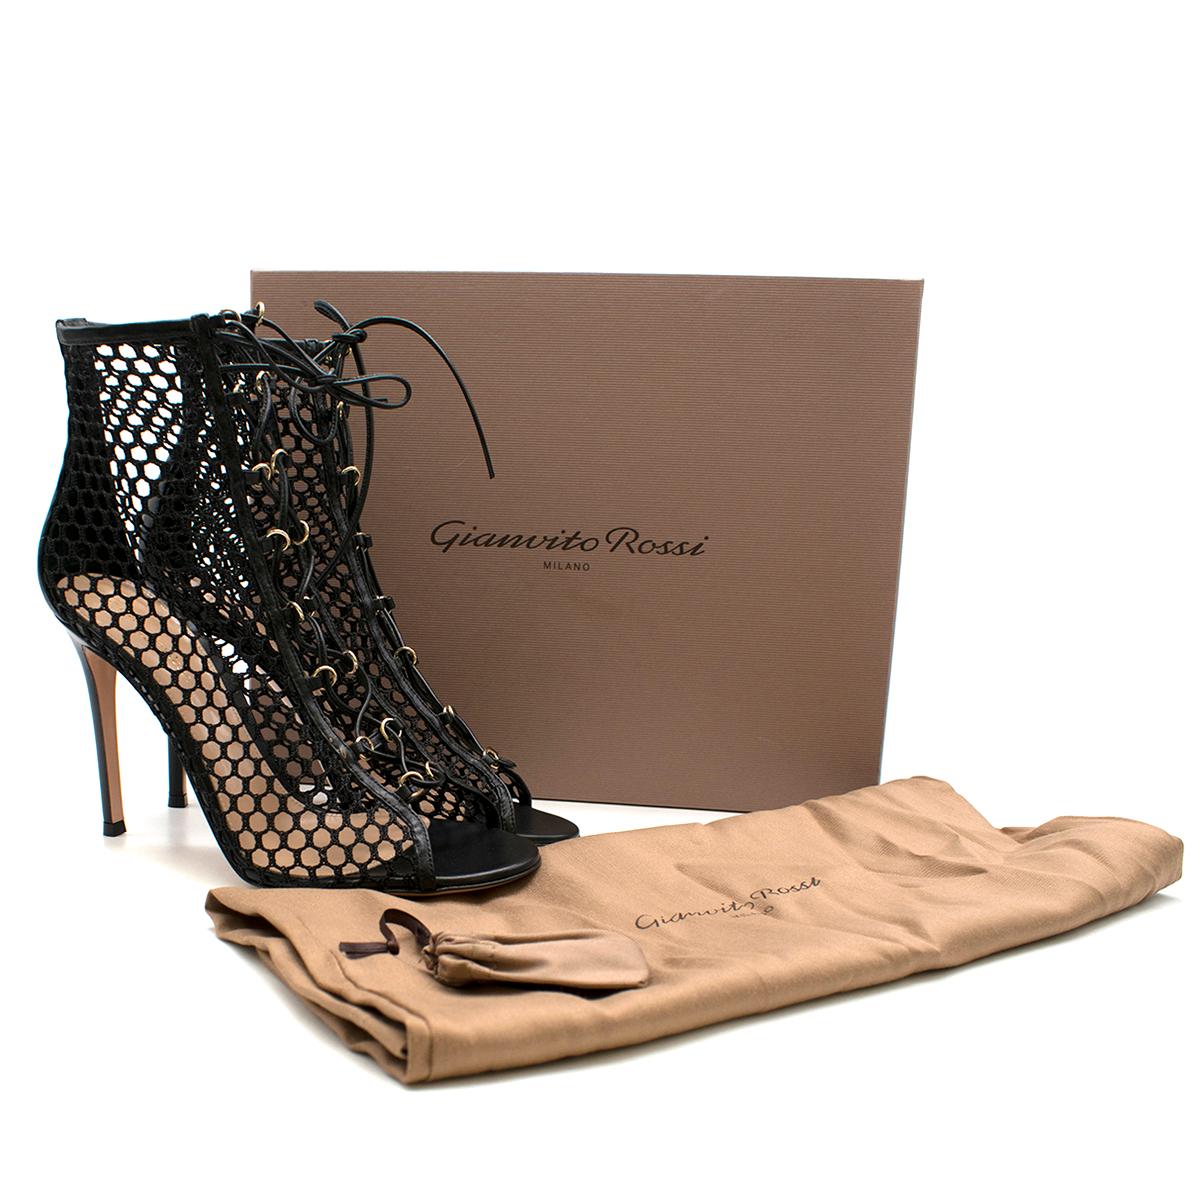 Gianvito Rossi Crochet Lace Up Peep

- Black peep heels
- Fishnet crochet
- Front lace-up
- 105mm stiletto heel
- Open toe
- This item comes with the original dust bag and shoe box.

Please note, these items are pre-owned and may show some signs of